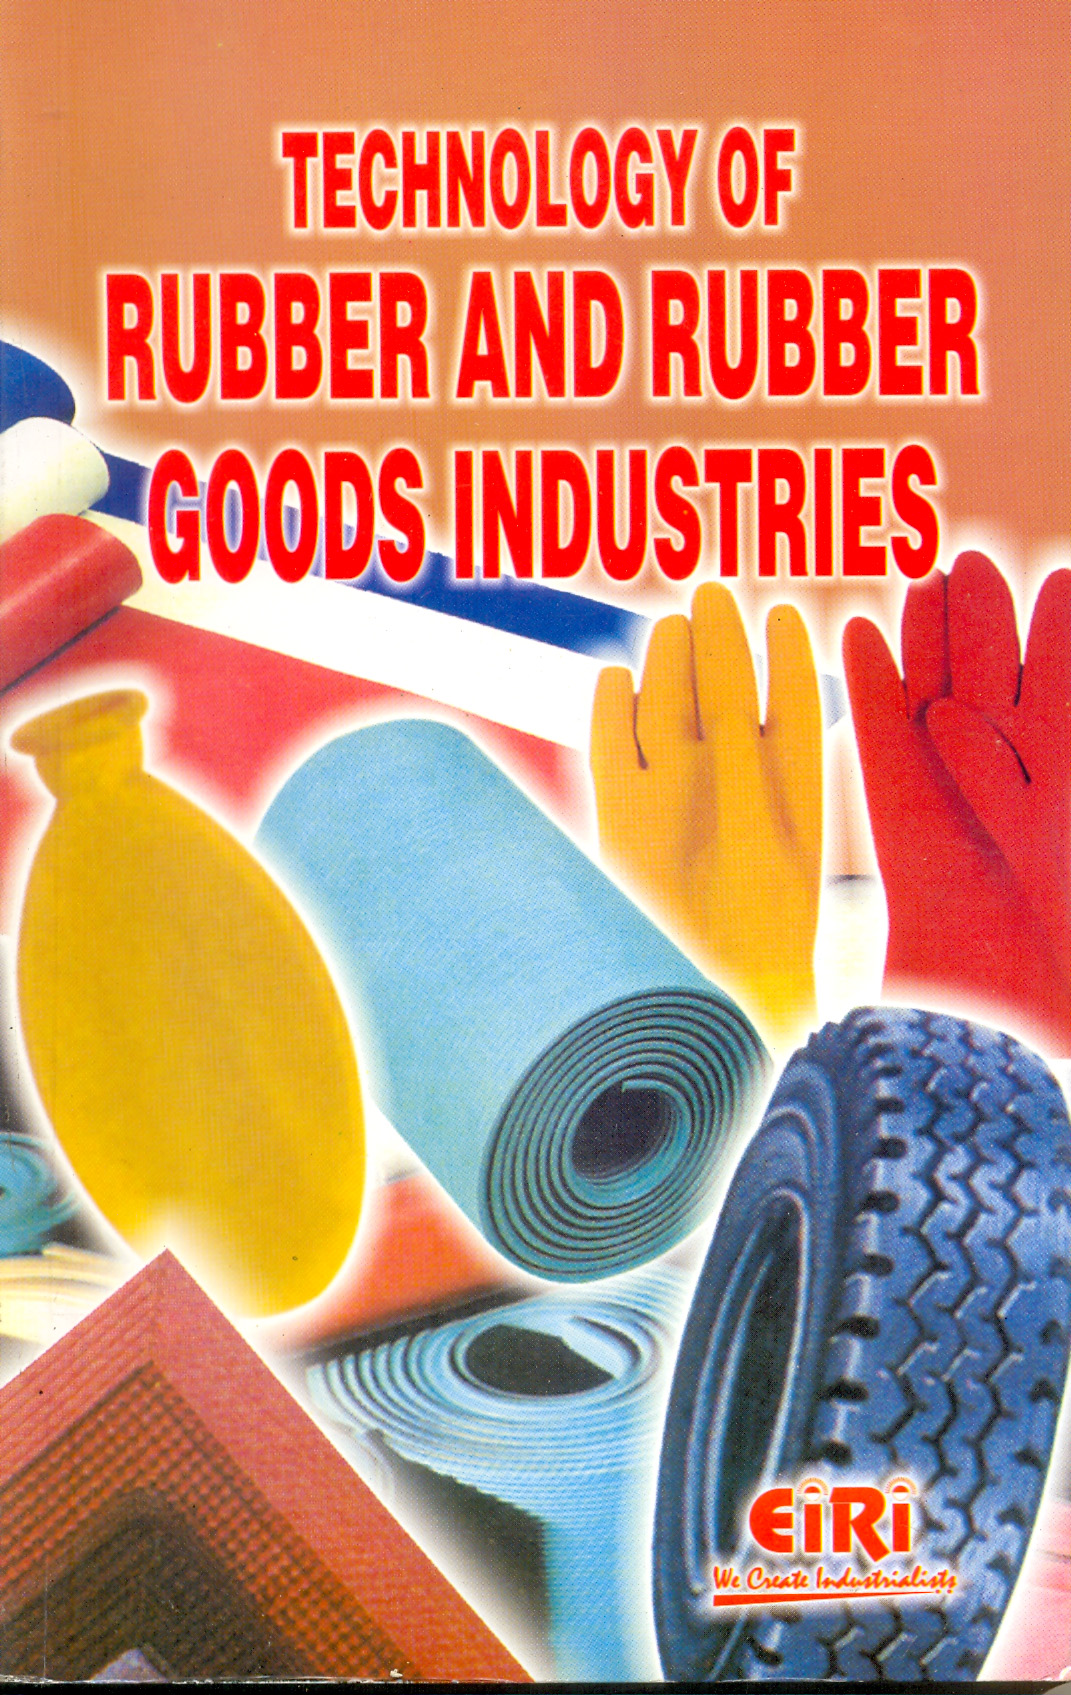 technology of rubber and rubber goods industries (hand book)